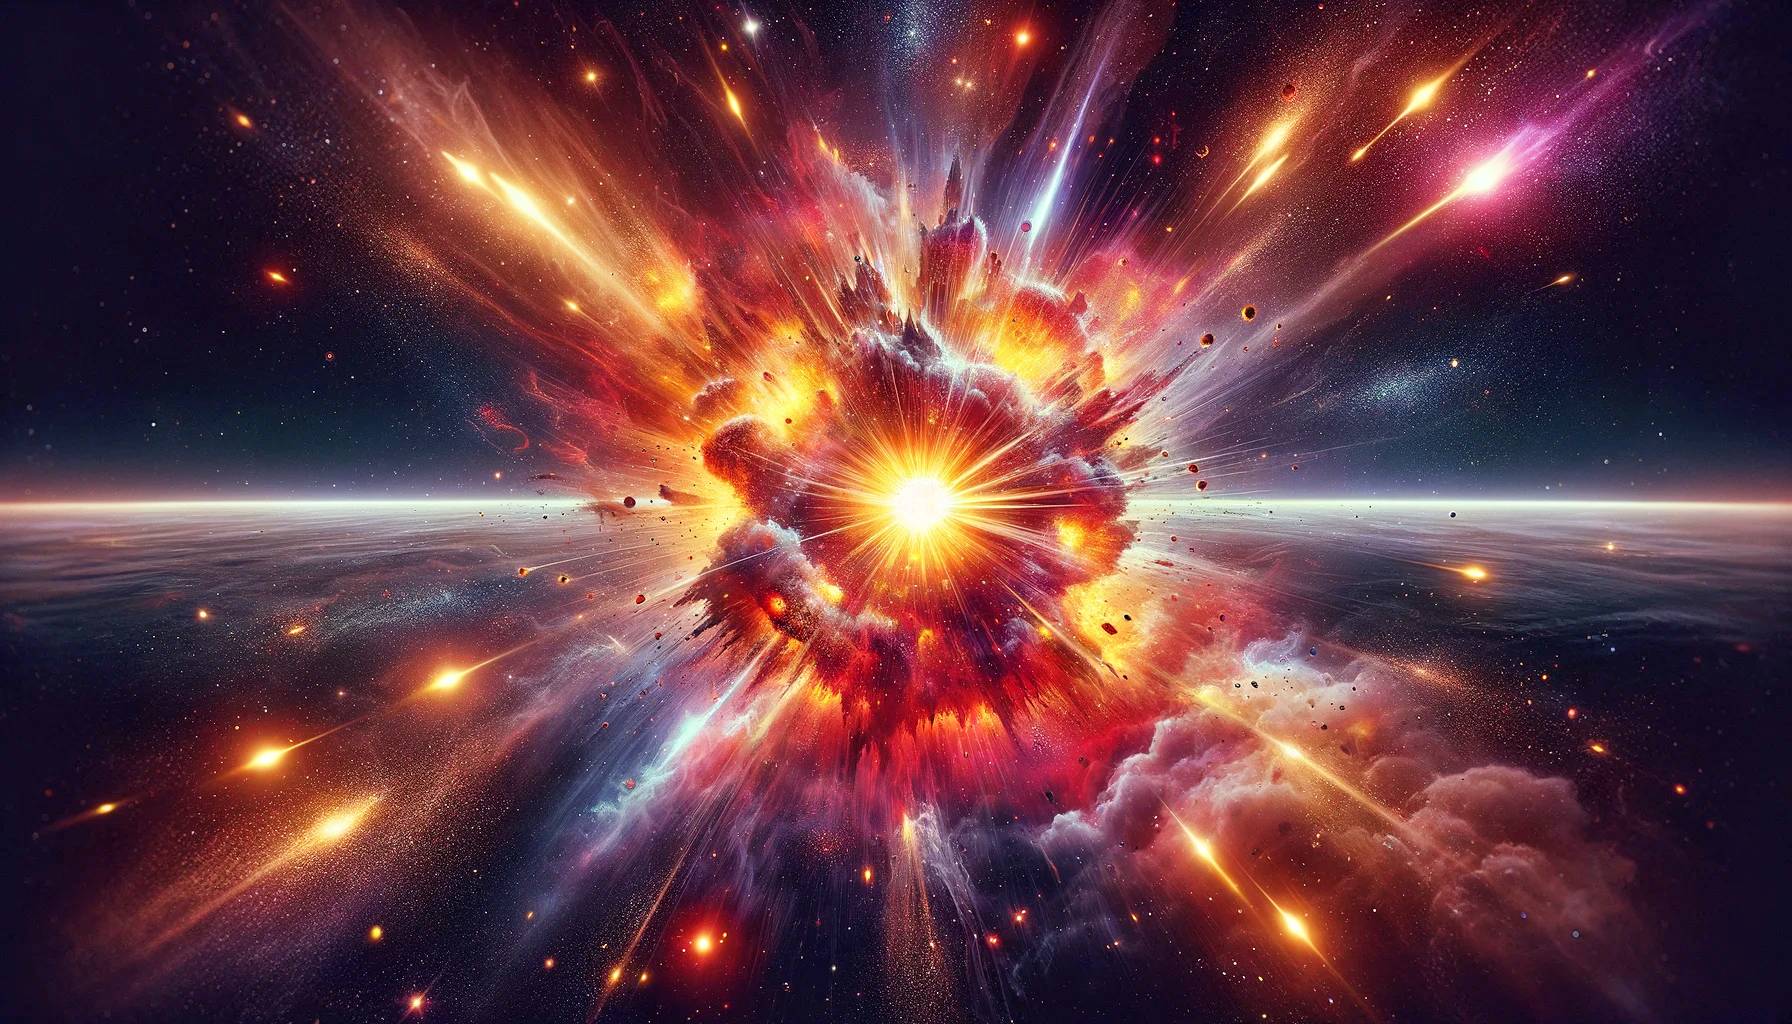 The explosion of a star defies the laws of physics has left researchers without explanations